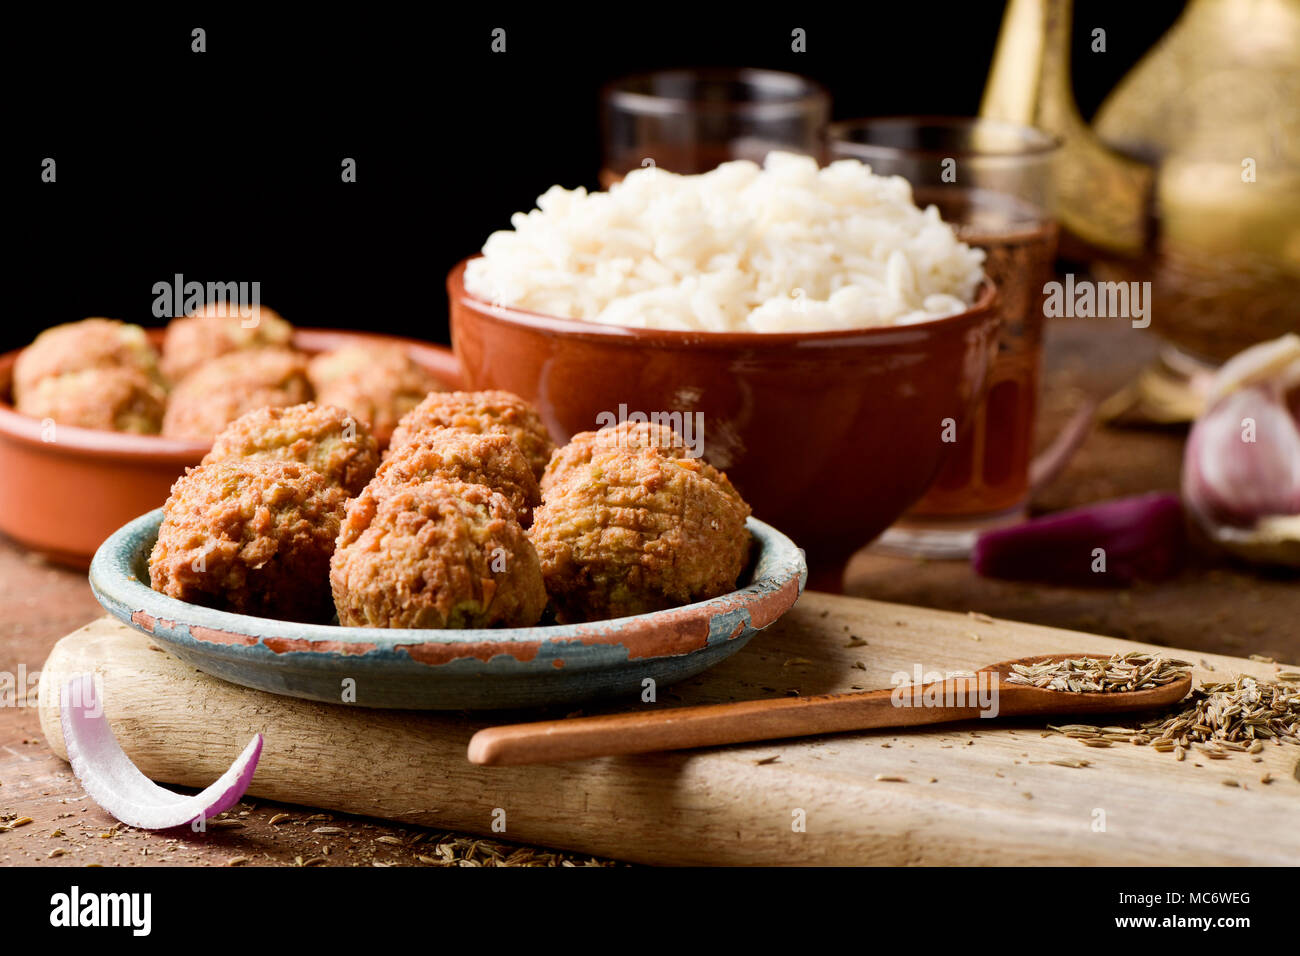 some falafel in a green earthenware plate and a brown earthenware bowl with long grain rice on a rustic wooden table, with a golden teapot and some or Stock Photo